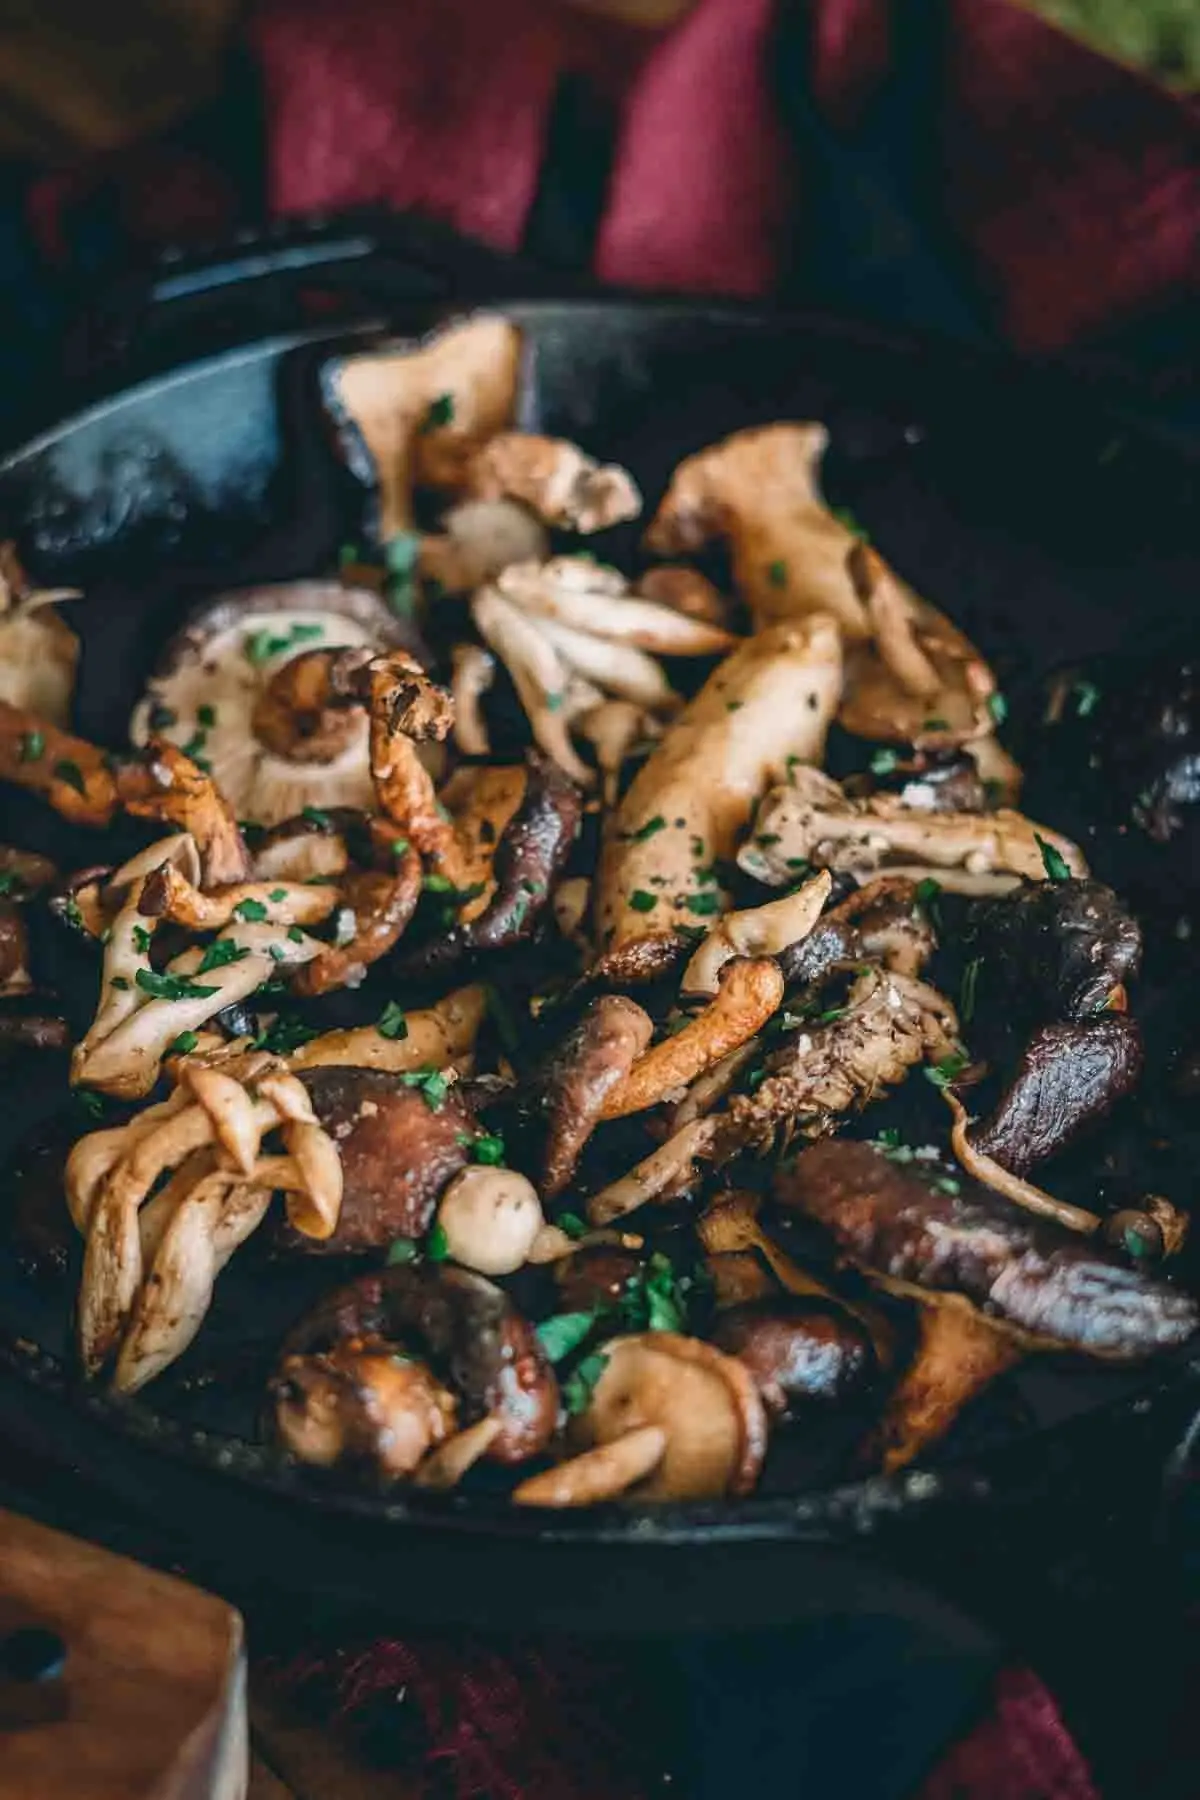 smoked mushrooms and onions - How to saute mushrooms and onions without oil